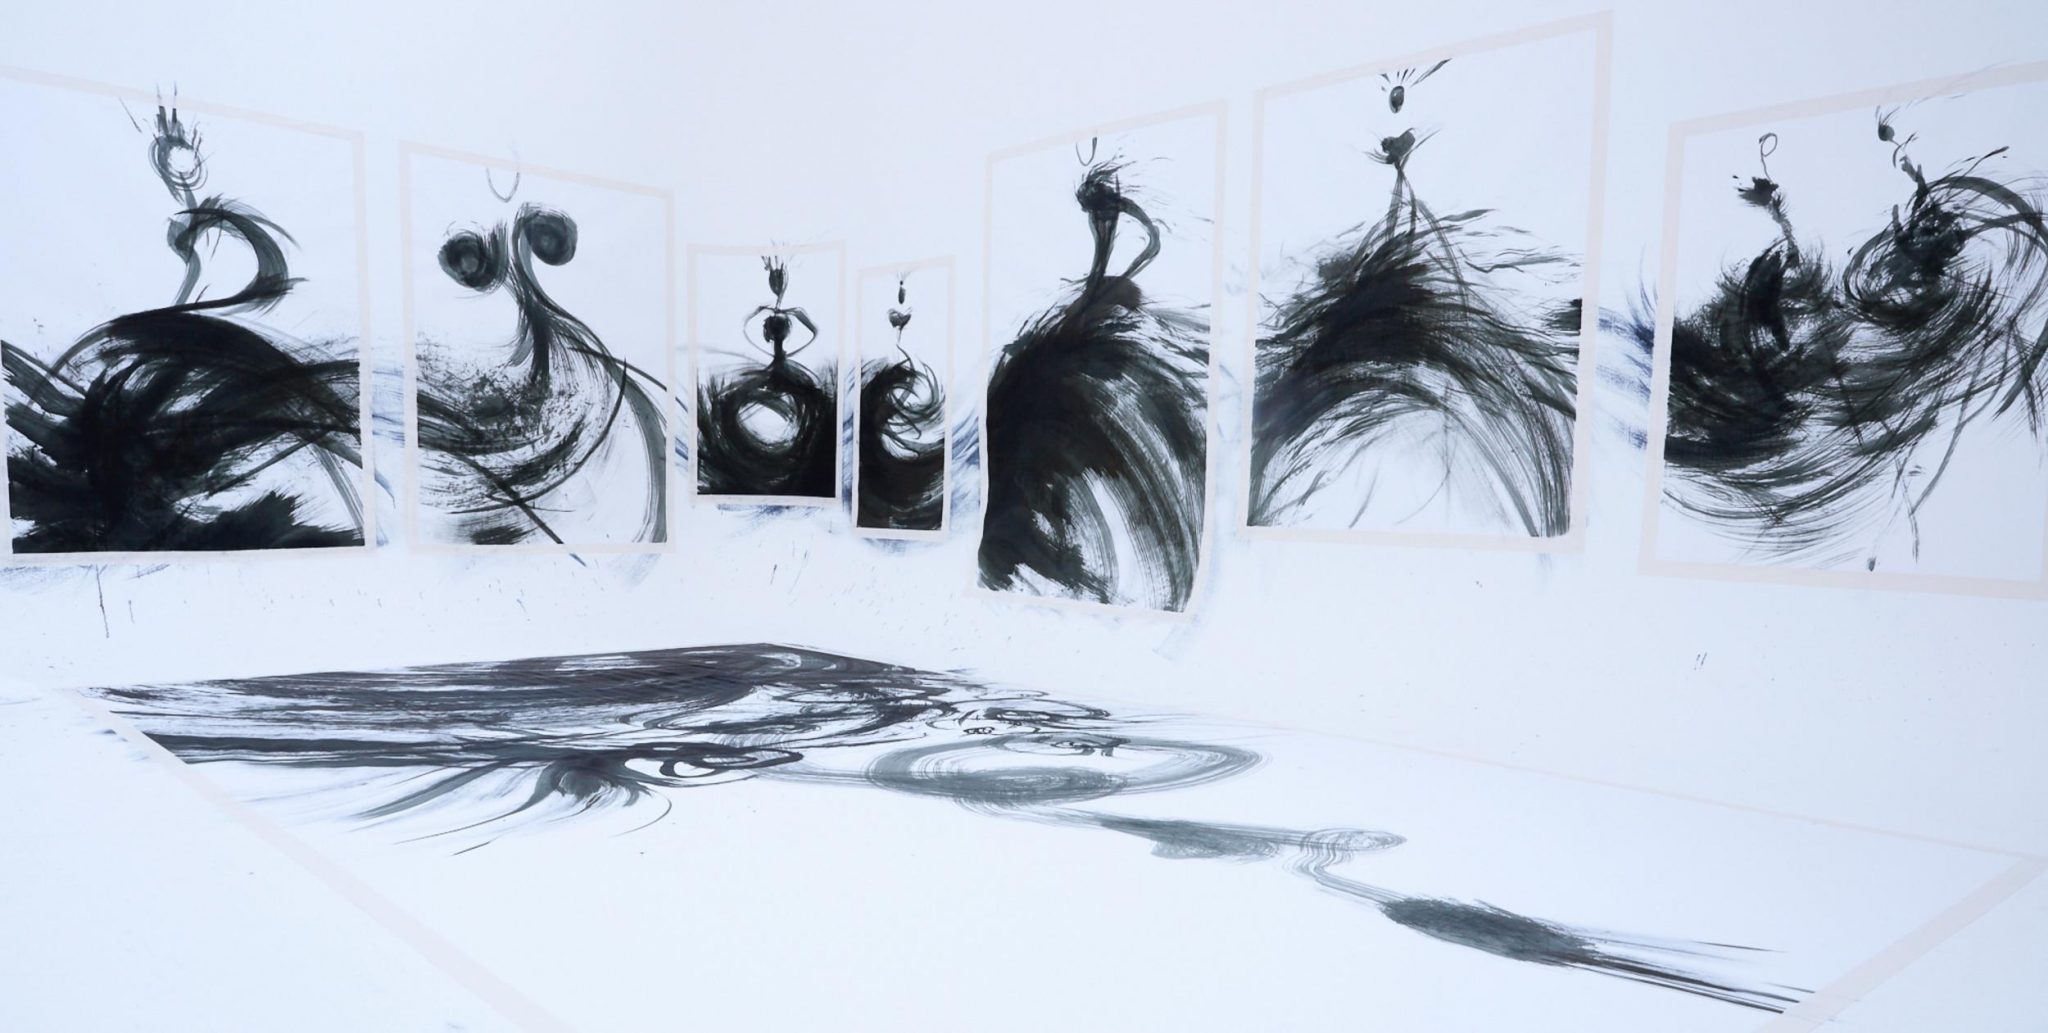  | SHOWStudio | Nightlight Series: On 26 April 2019, artist Tobie Giddio took up residency in the SHOWstudio space to create a large-scale fashion illustration live. The broadcast showcases Giddio’s creative process from start to finish, documenting her as she paints the walls and floor of the studio cove with ink. For this work, Giddio utilises a unique set of tools, comprising large Japanese brushes, mops and feather dusters.  | 10